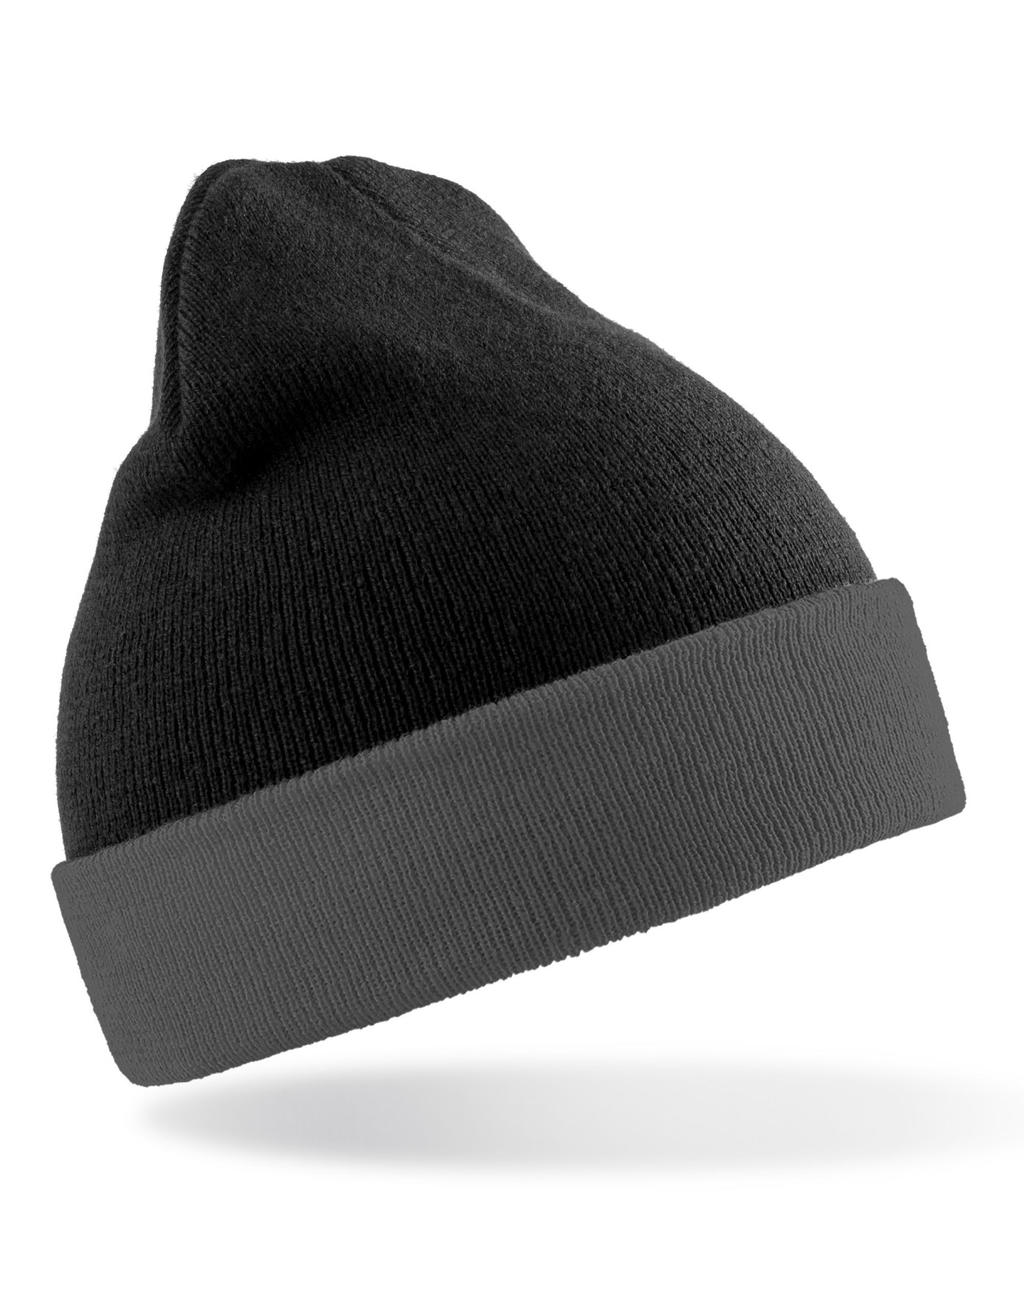  Recycled Black Compass Beanie in Farbe Black/Grey